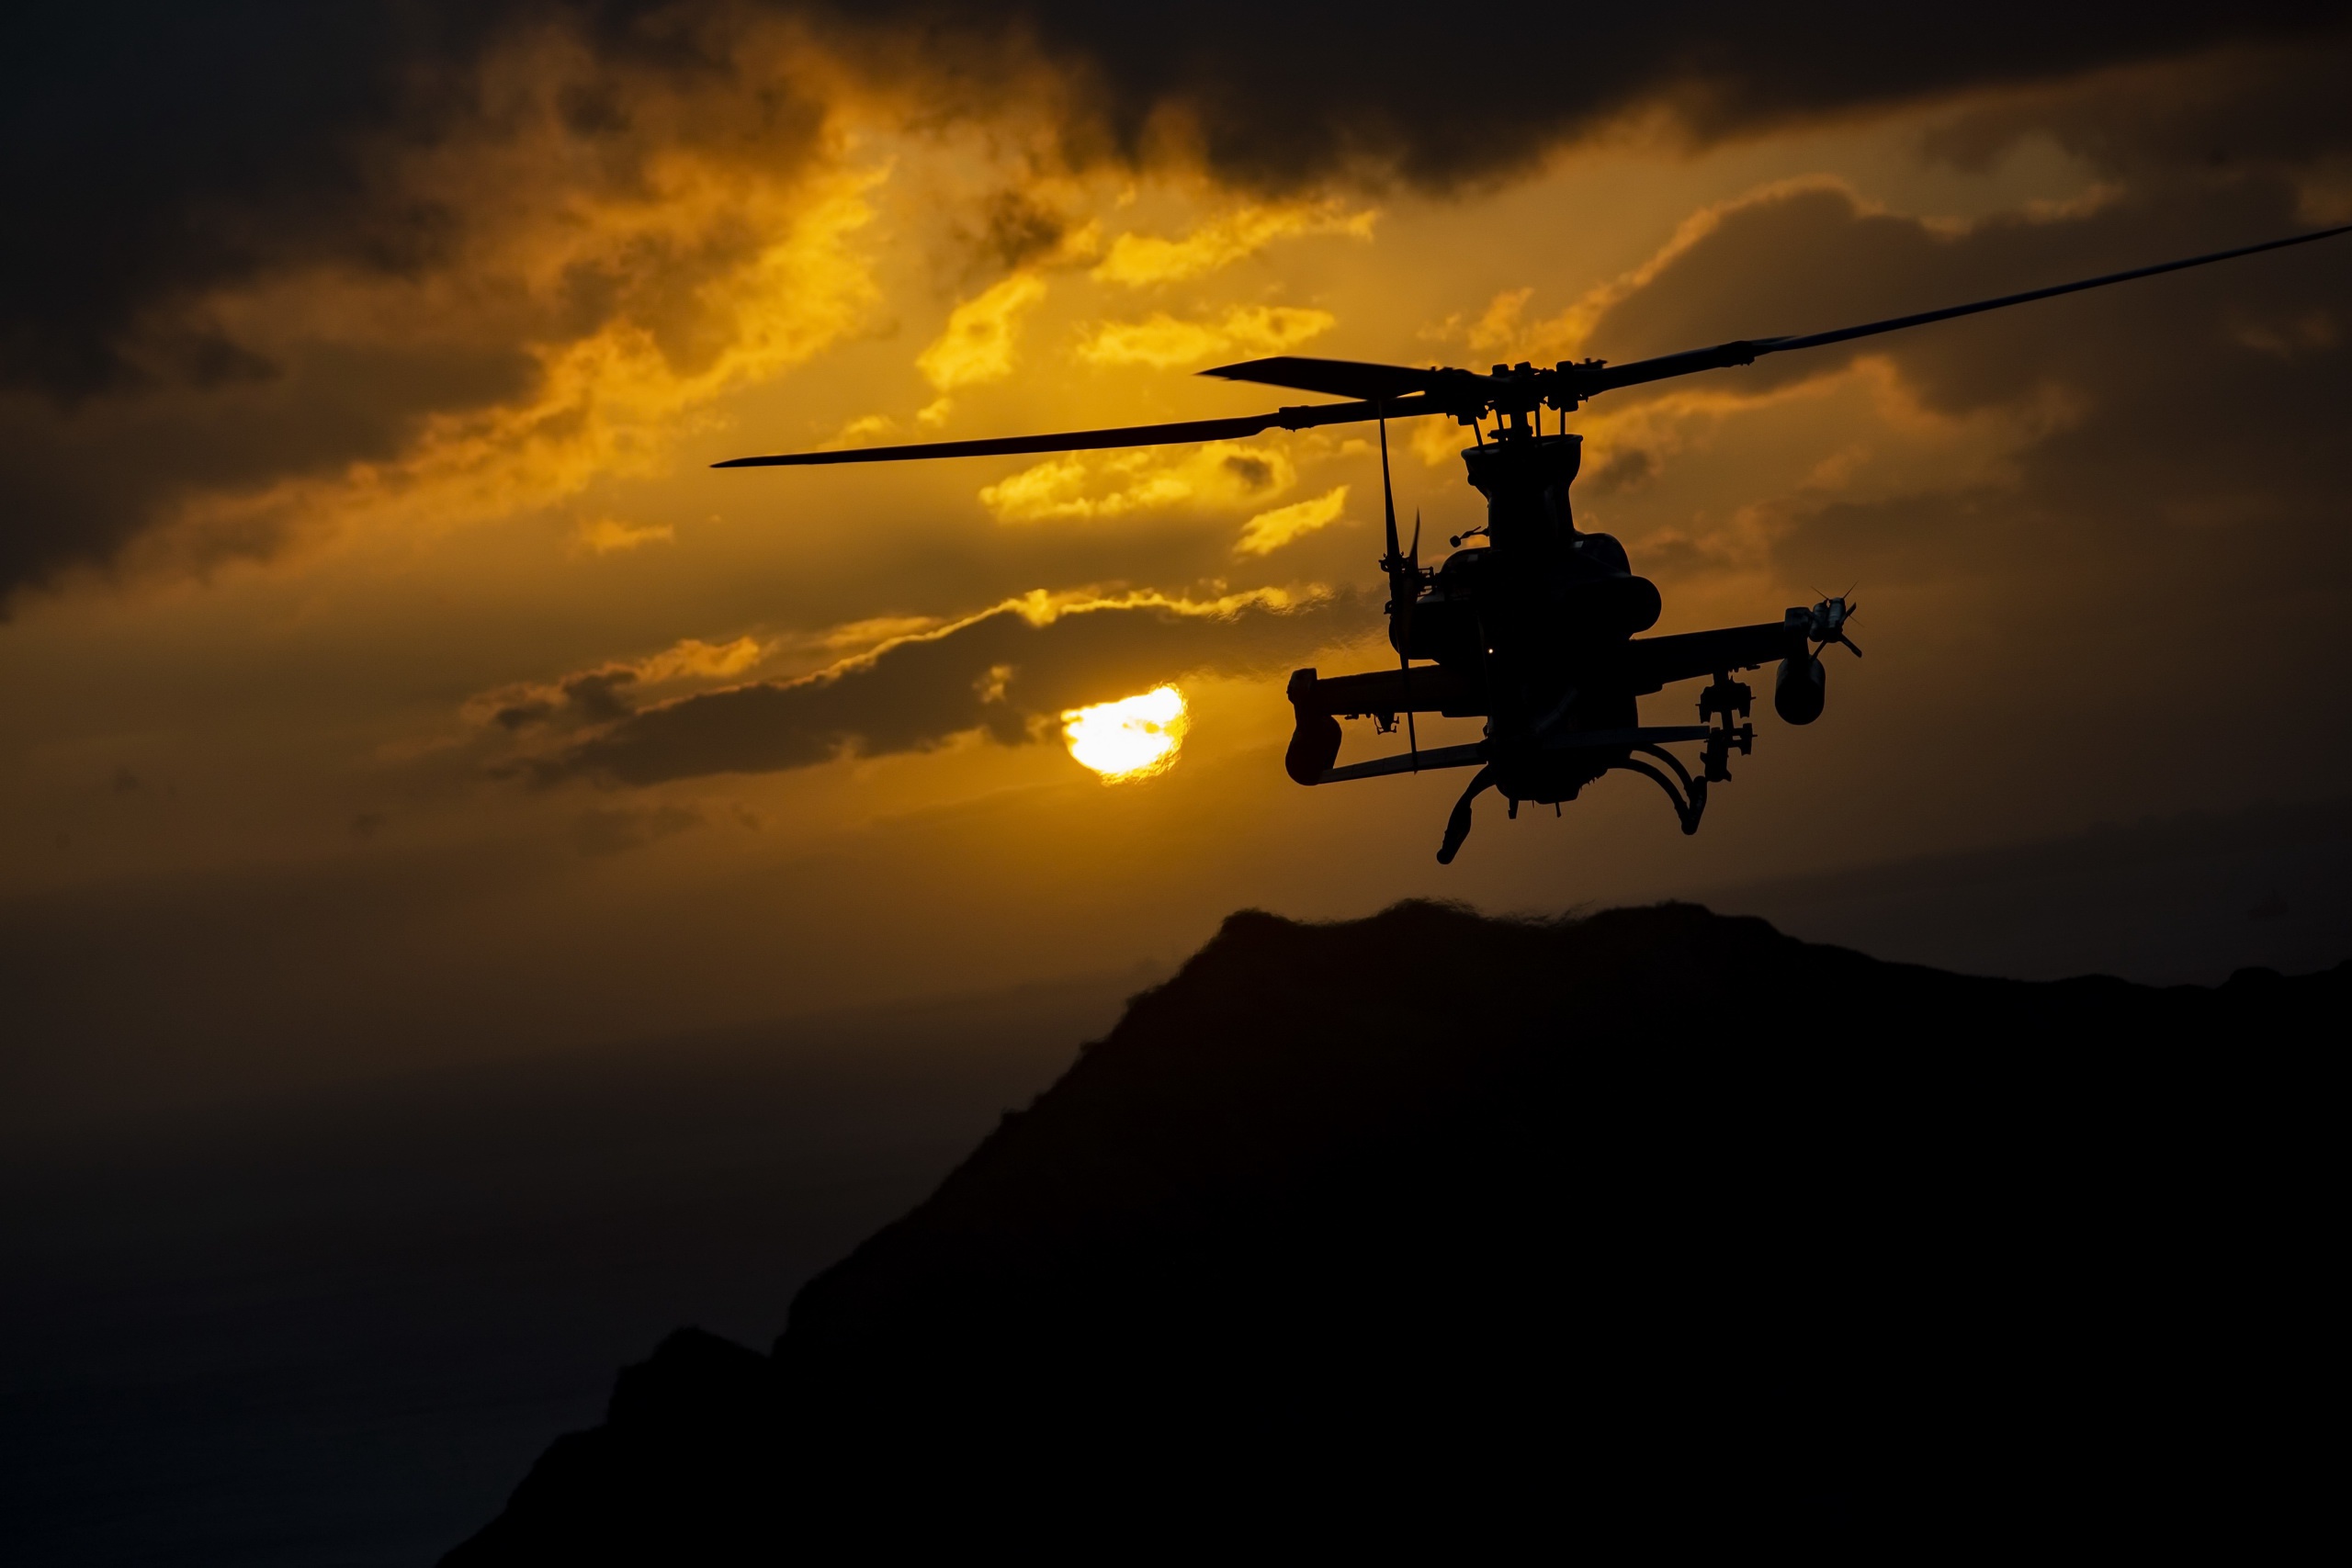 Military Bell AH-1Z Viper HD Wallpaper | Background Image